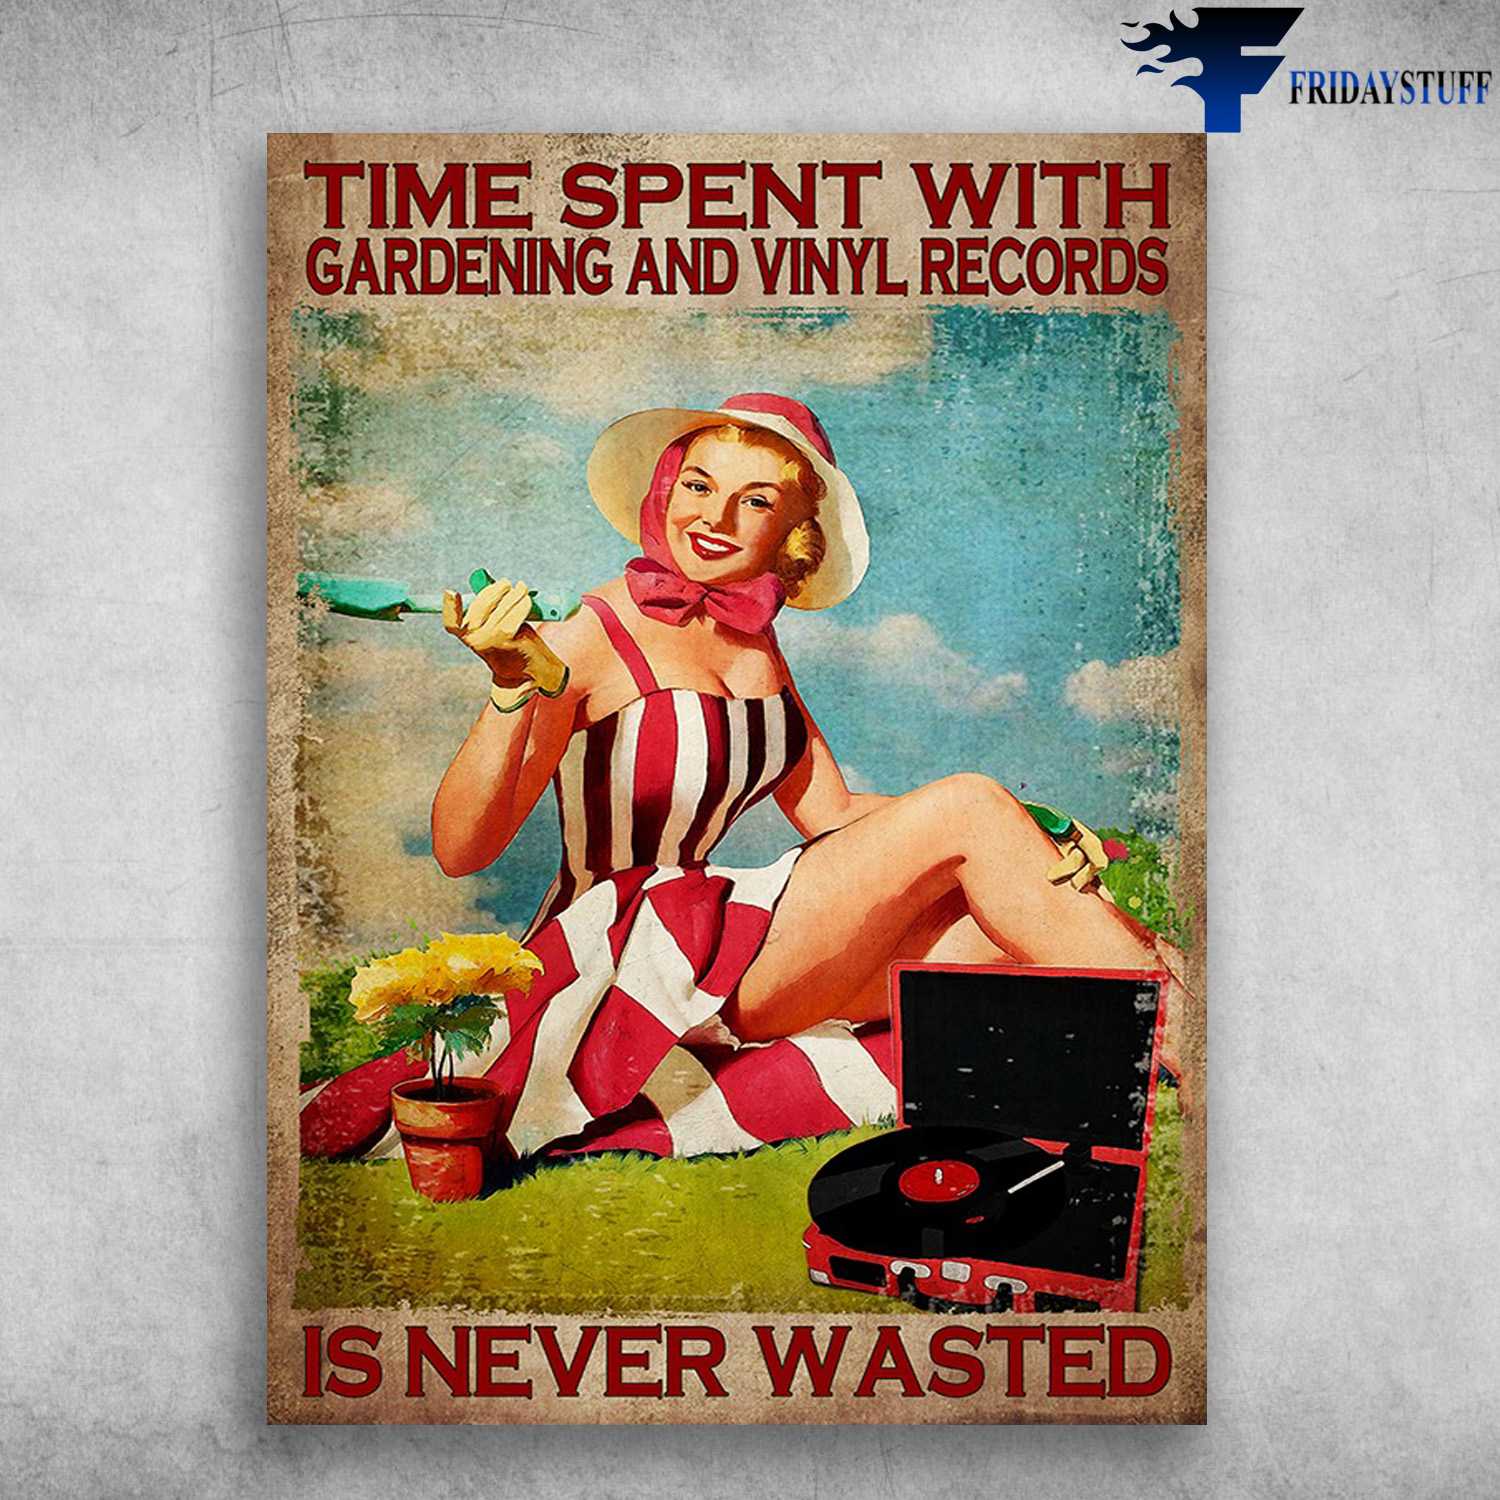 FLower And Music, Lady Gardening - Time Spent With, Gardening And Vinyl Records, Is Never Wasted